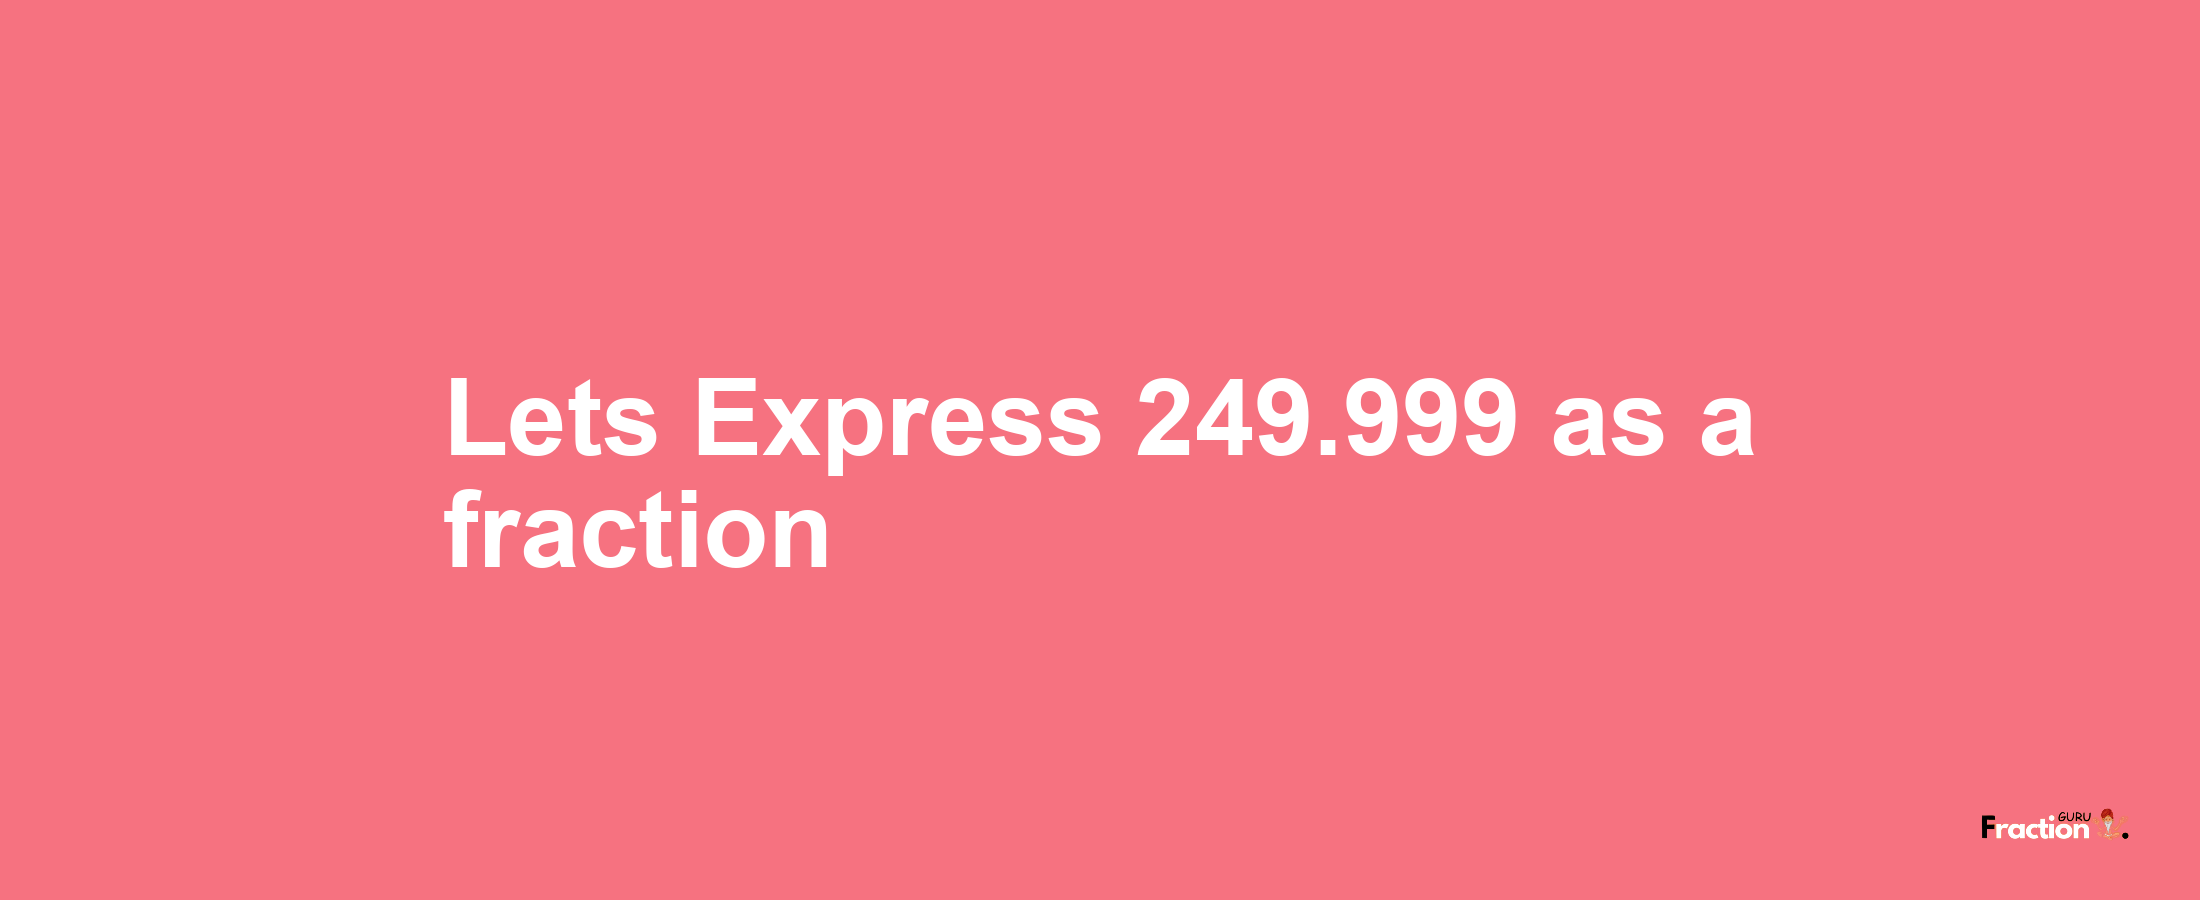 Lets Express 249.999 as afraction